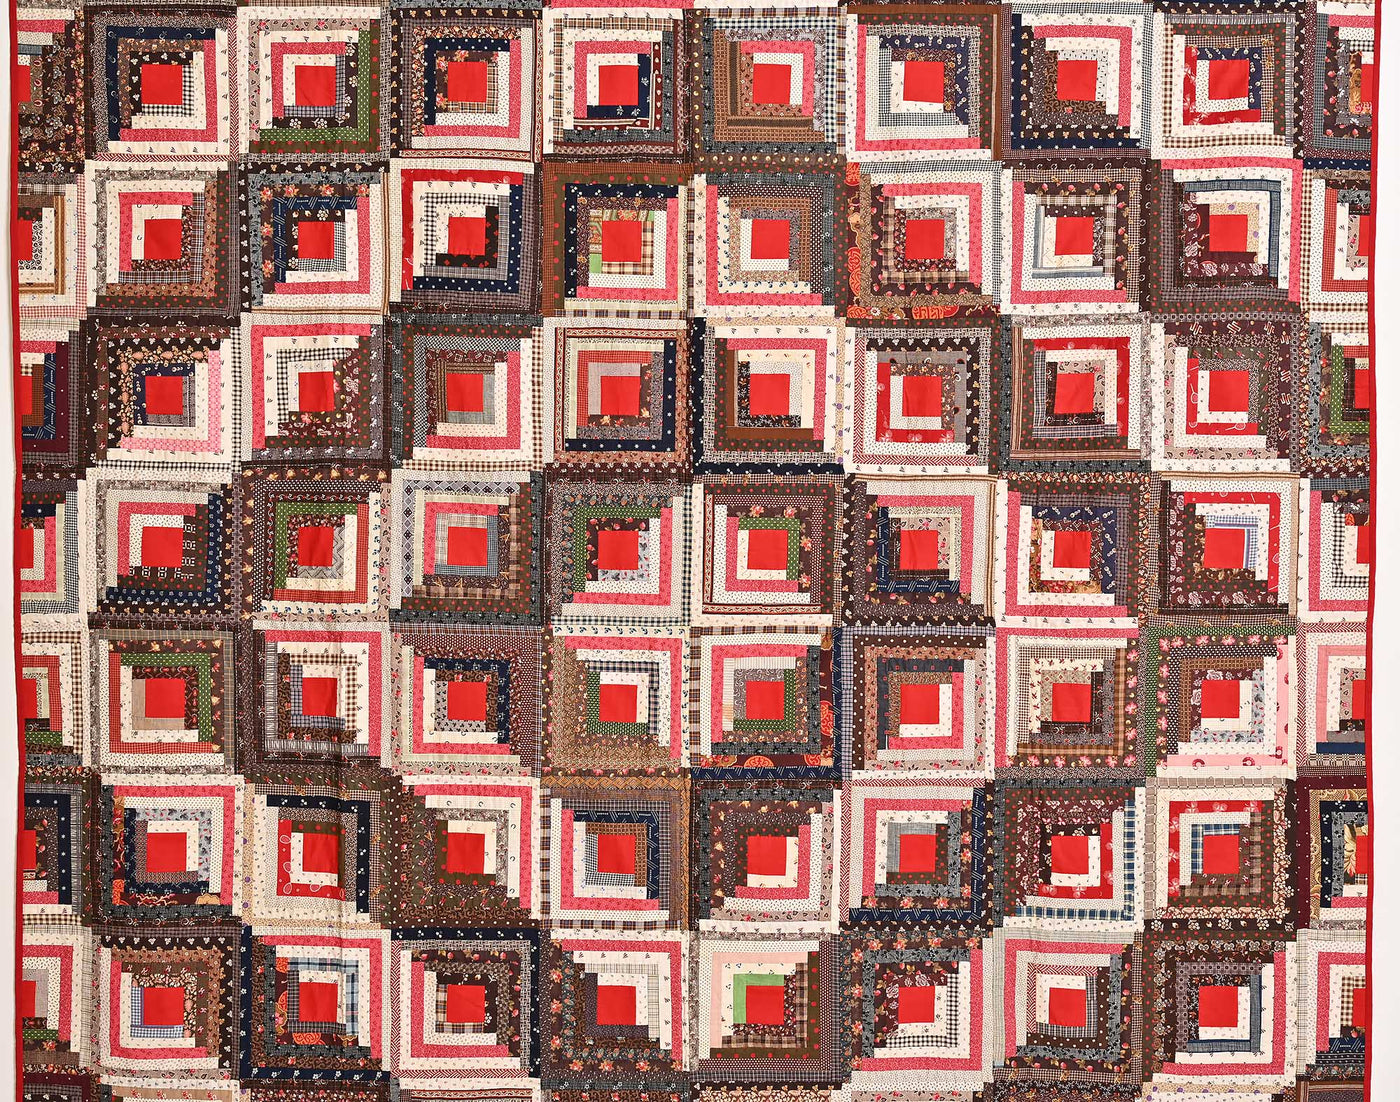 Central view of diamond shapes in the center of 19th century Barn-raising Log Cabin Quilt from the 19th century.